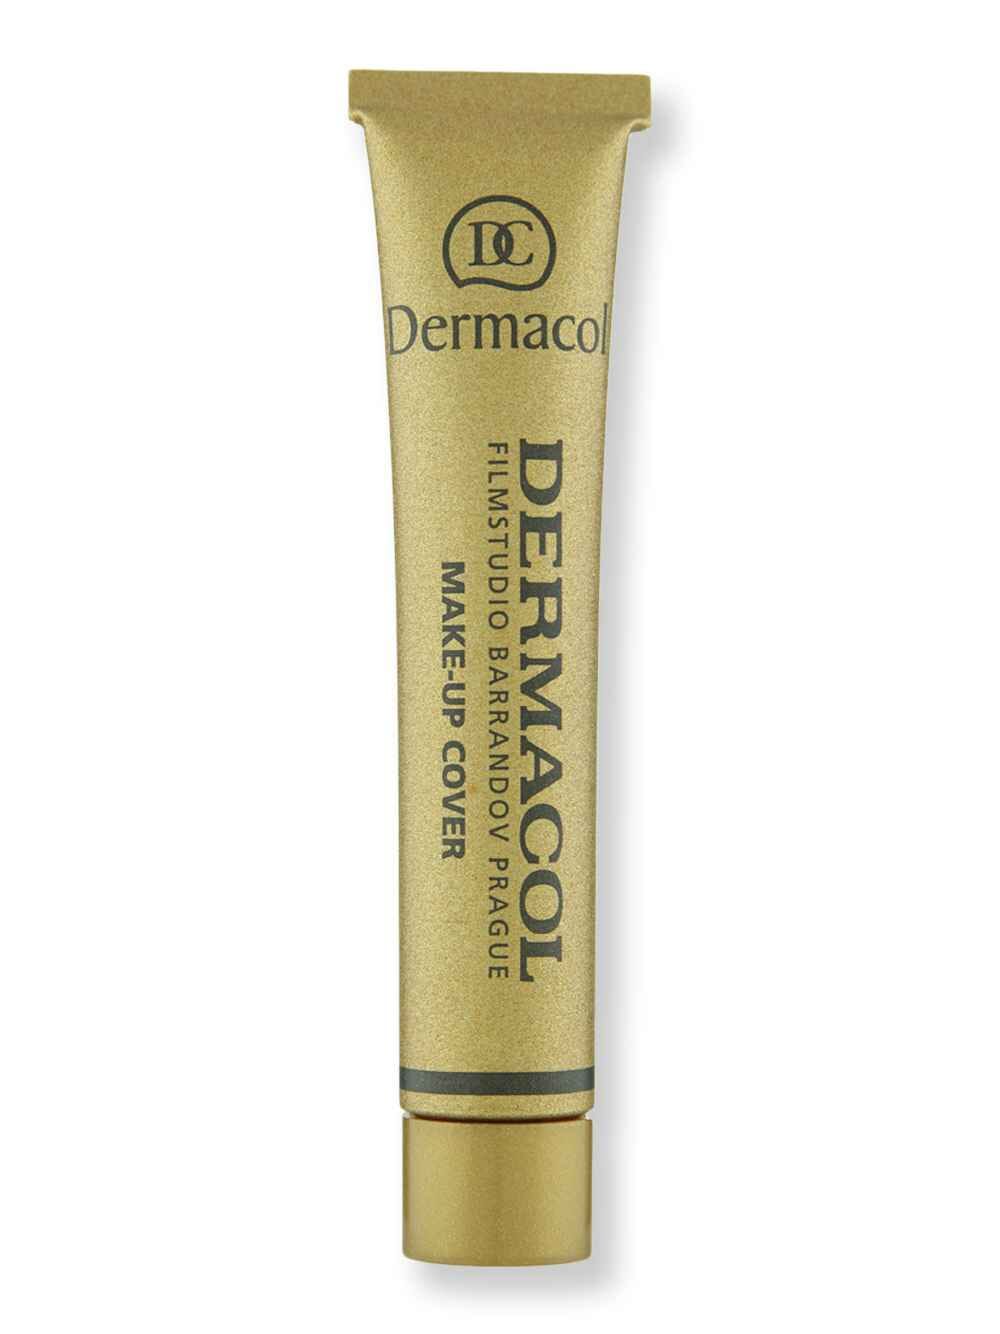 Dermacol Dermacol Make-up Cover 30 g223 Tinted Moisturizers & Foundations 